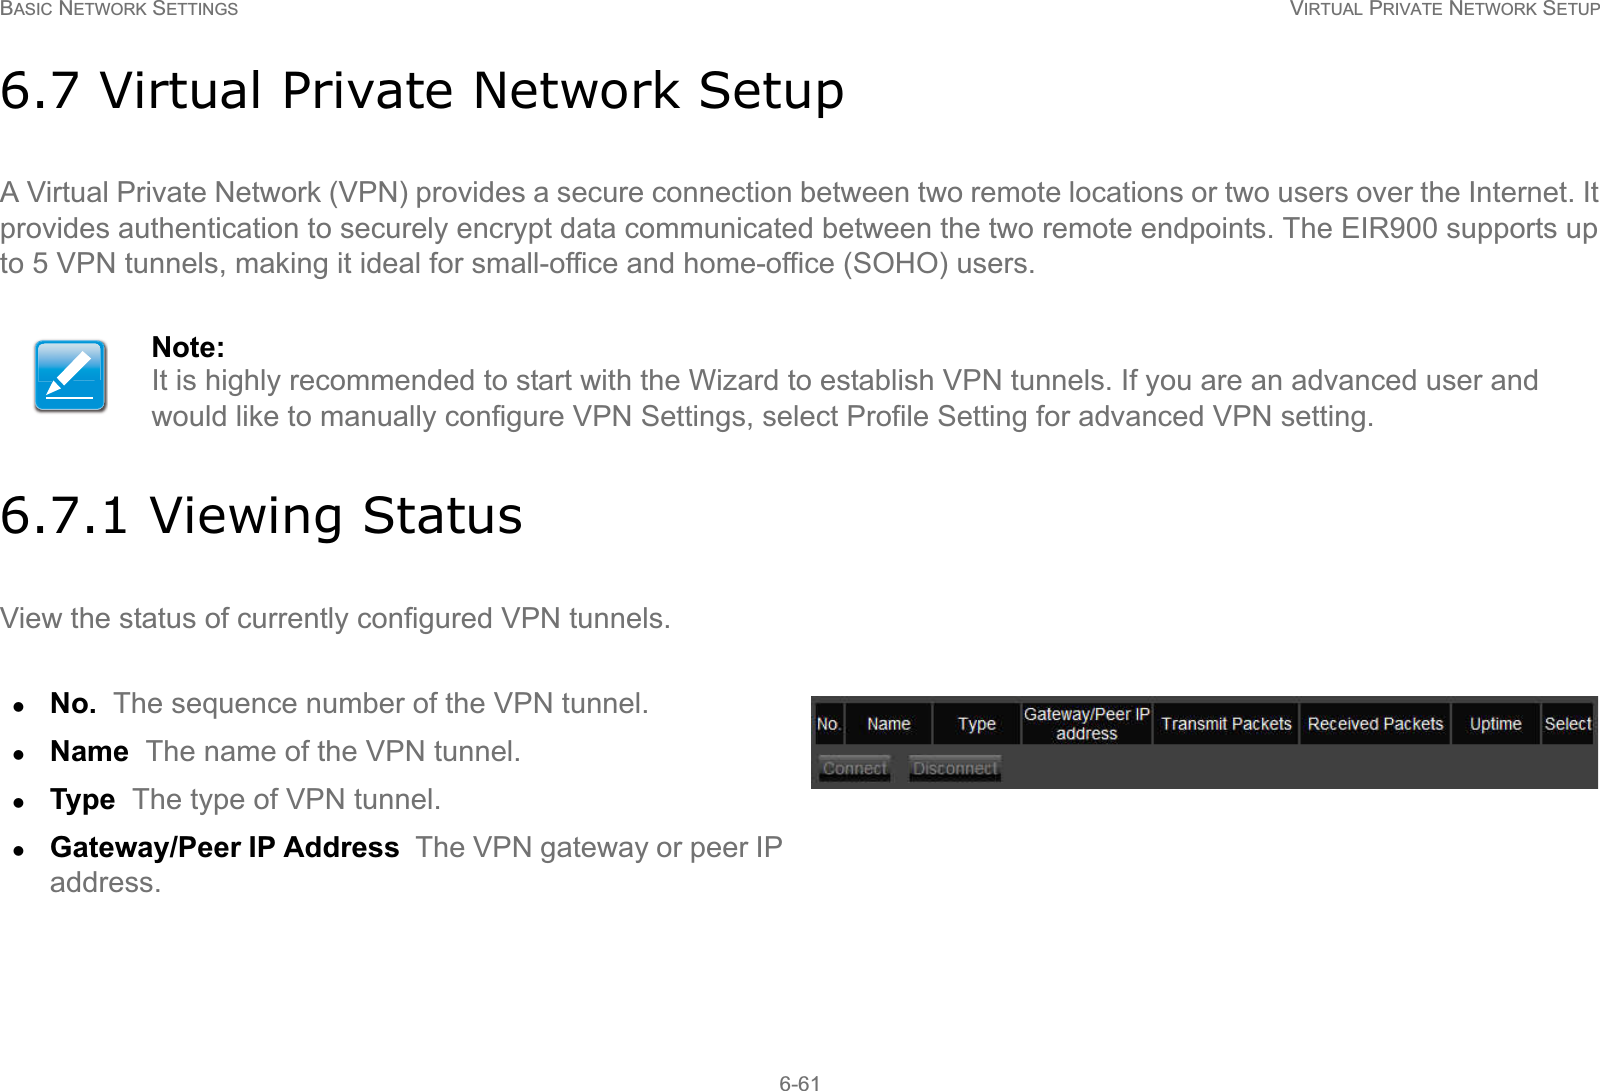 BASIC NETWORK SETTINGS VIRTUAL PRIVATE NETWORK SETUP6-616.7 Virtual Private Network SetupA Virtual Private Network (VPN) provides a secure connection between two remote locations or two users over the Internet. It provides authentication to securely encrypt data communicated between the two remote endpoints. The EIR900 supports up to 5 VPN tunnels, making it ideal for small-office and home-office (SOHO) users.6.7.1 Viewing StatusView the status of currently configured VPN tunnels.Note:It is highly recommended to start with the Wizard to establish VPN tunnels. If you are an advanced user and would like to manually configure VPN Settings, select Profile Setting for advanced VPN setting.zNo.  The sequence number of the VPN tunnel.zName  The name of the VPN tunnel.zType  The type of VPN tunnel.zGateway/Peer IP Address  The VPN gateway or peer IP address.